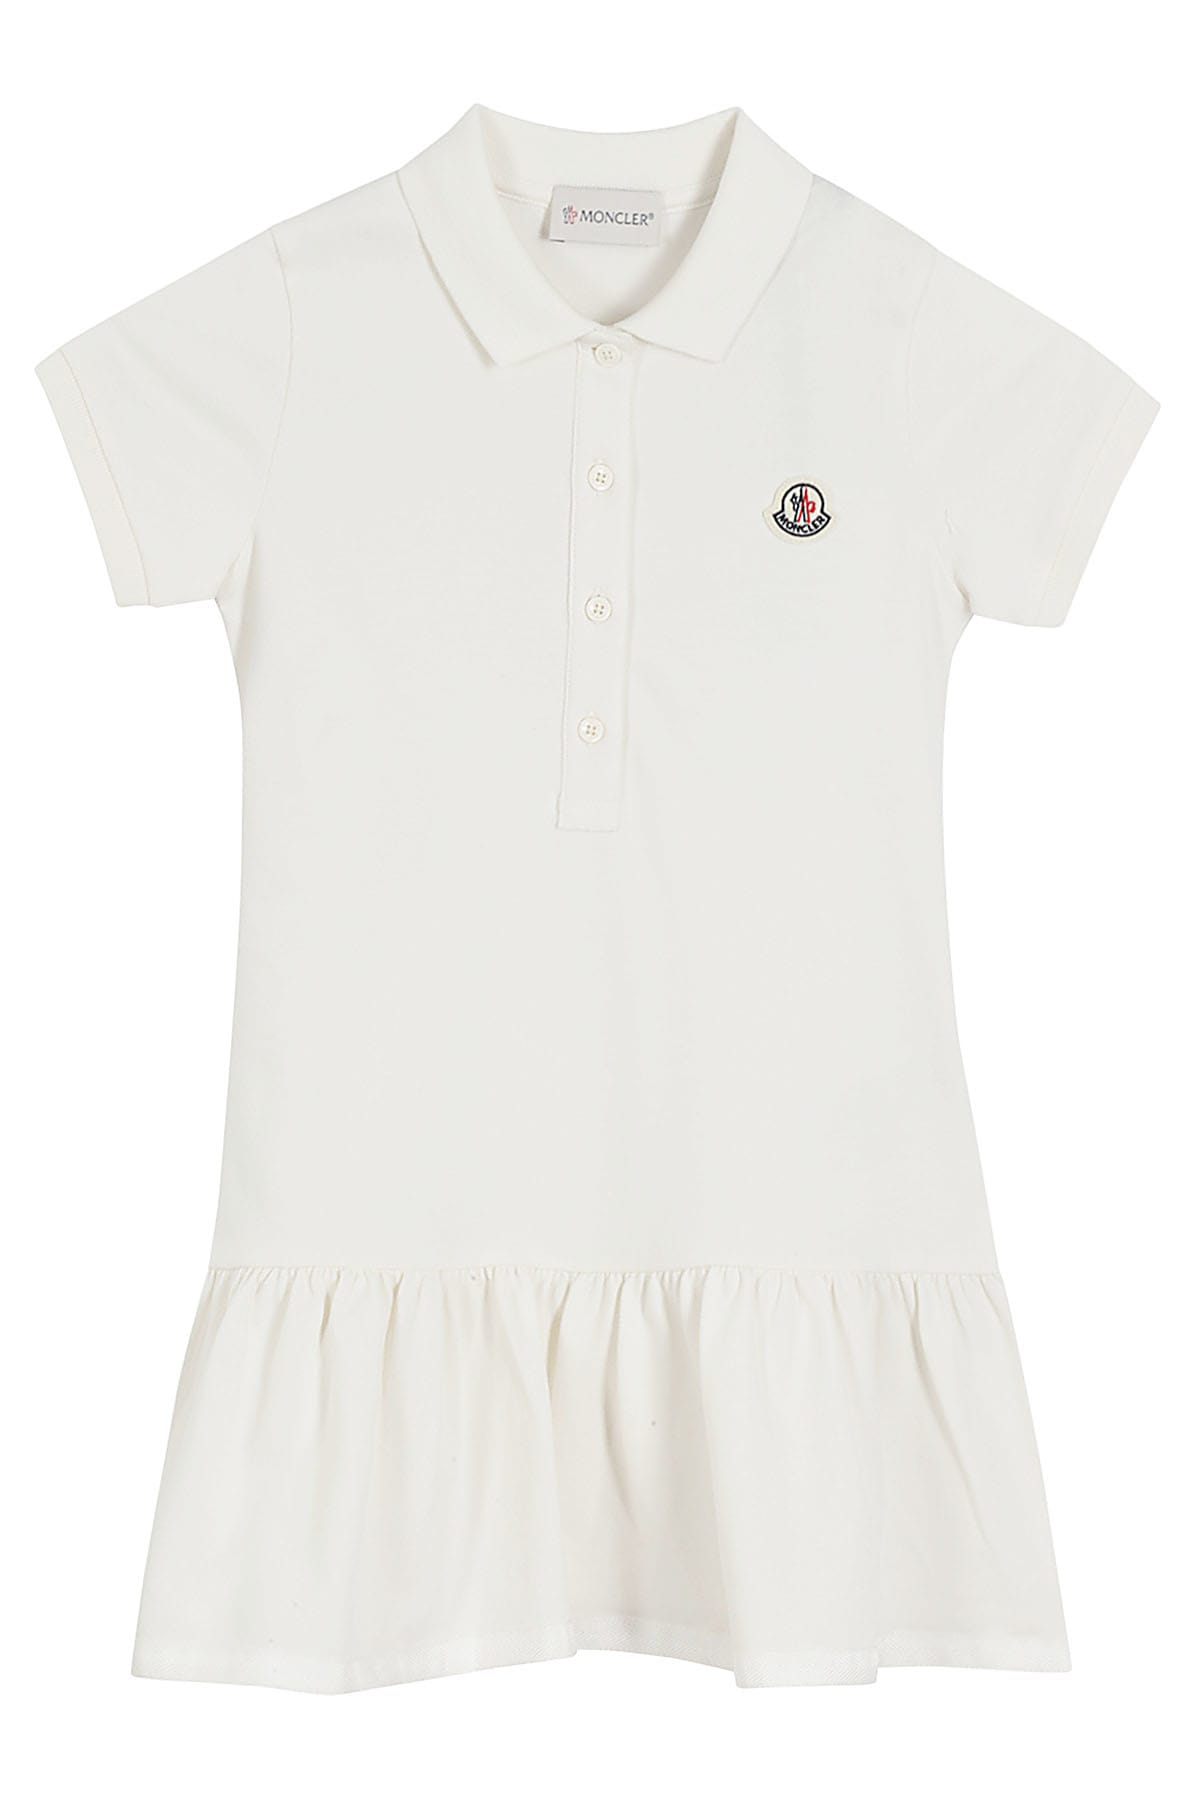 Moncler Kids' Dress Polo Neck In Bianco